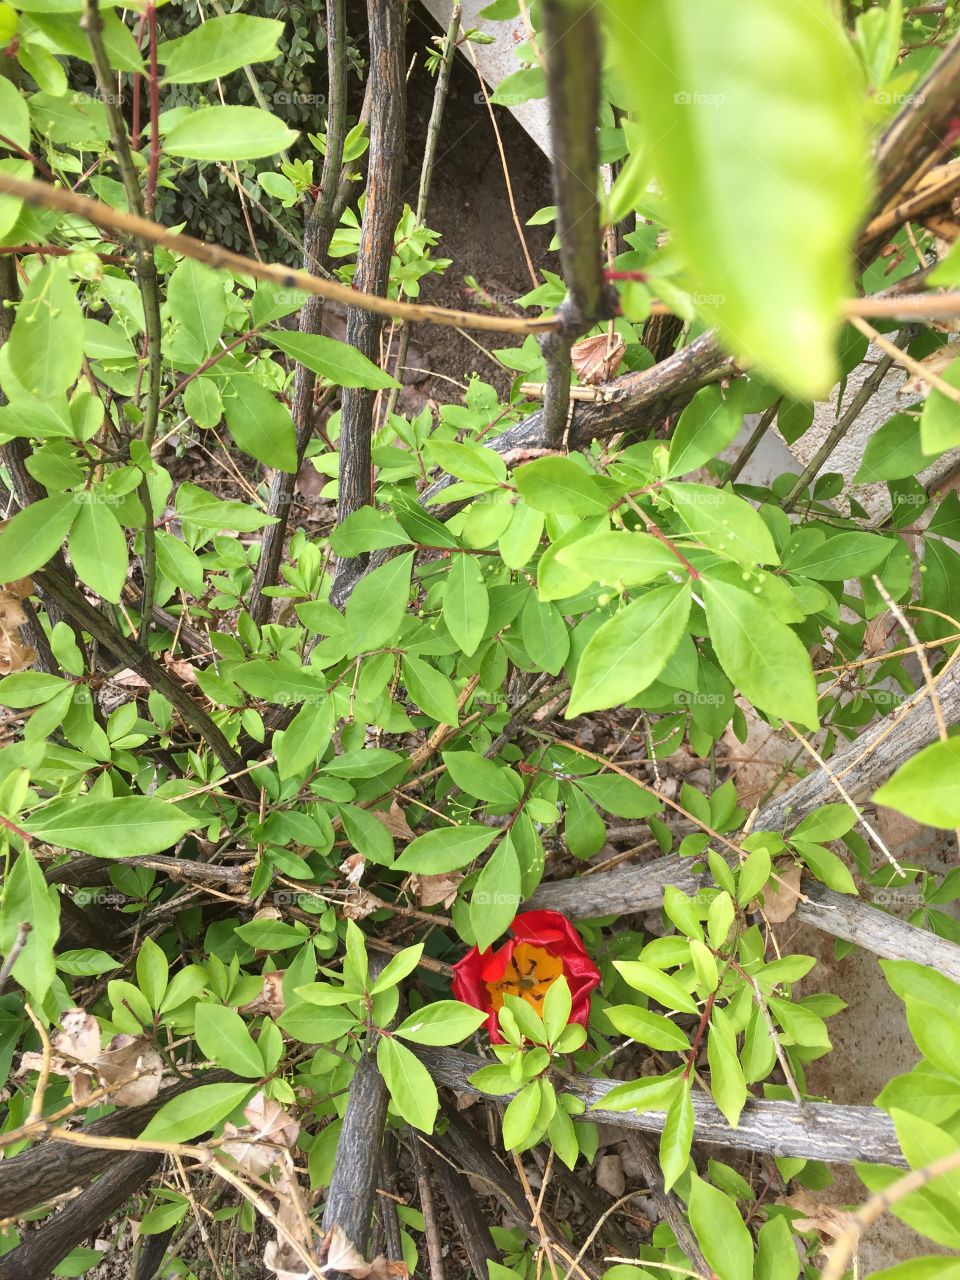 Red Tulip in The Tree